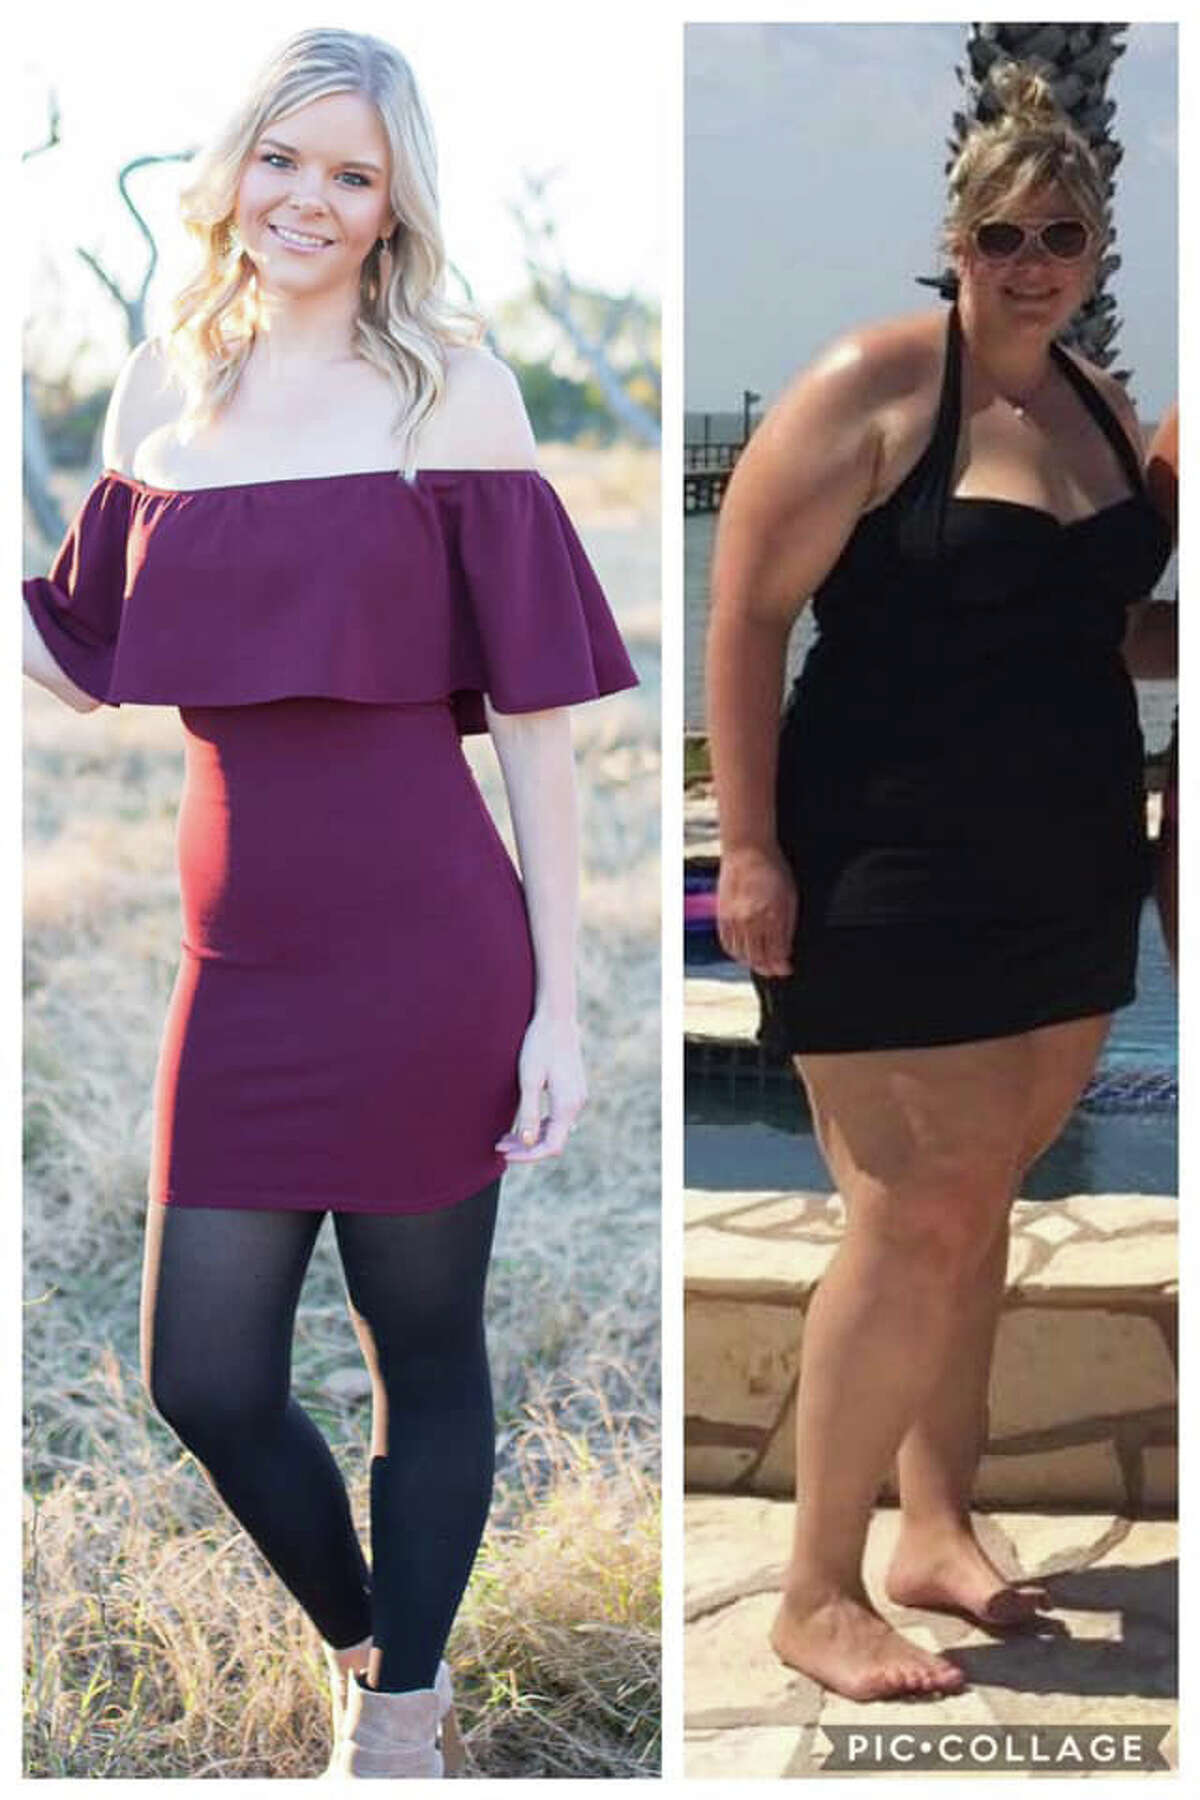 Alexis Moczygemba shows off her weight loss transformation from 309 pounds to 145 pounds.